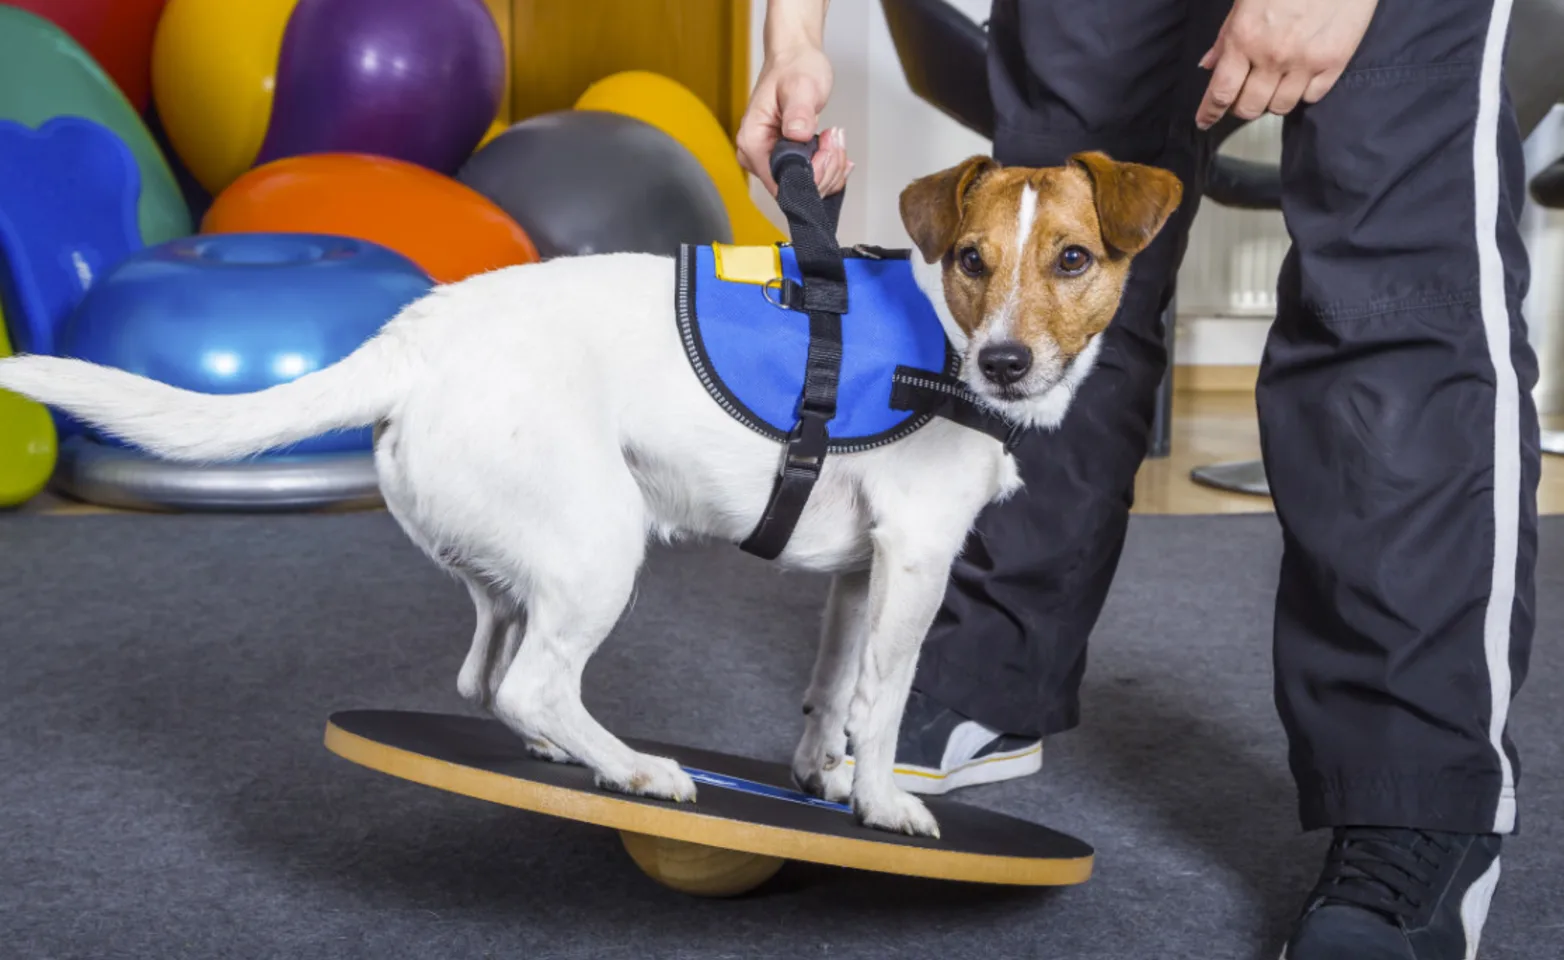 Dog on a Board with Trainer